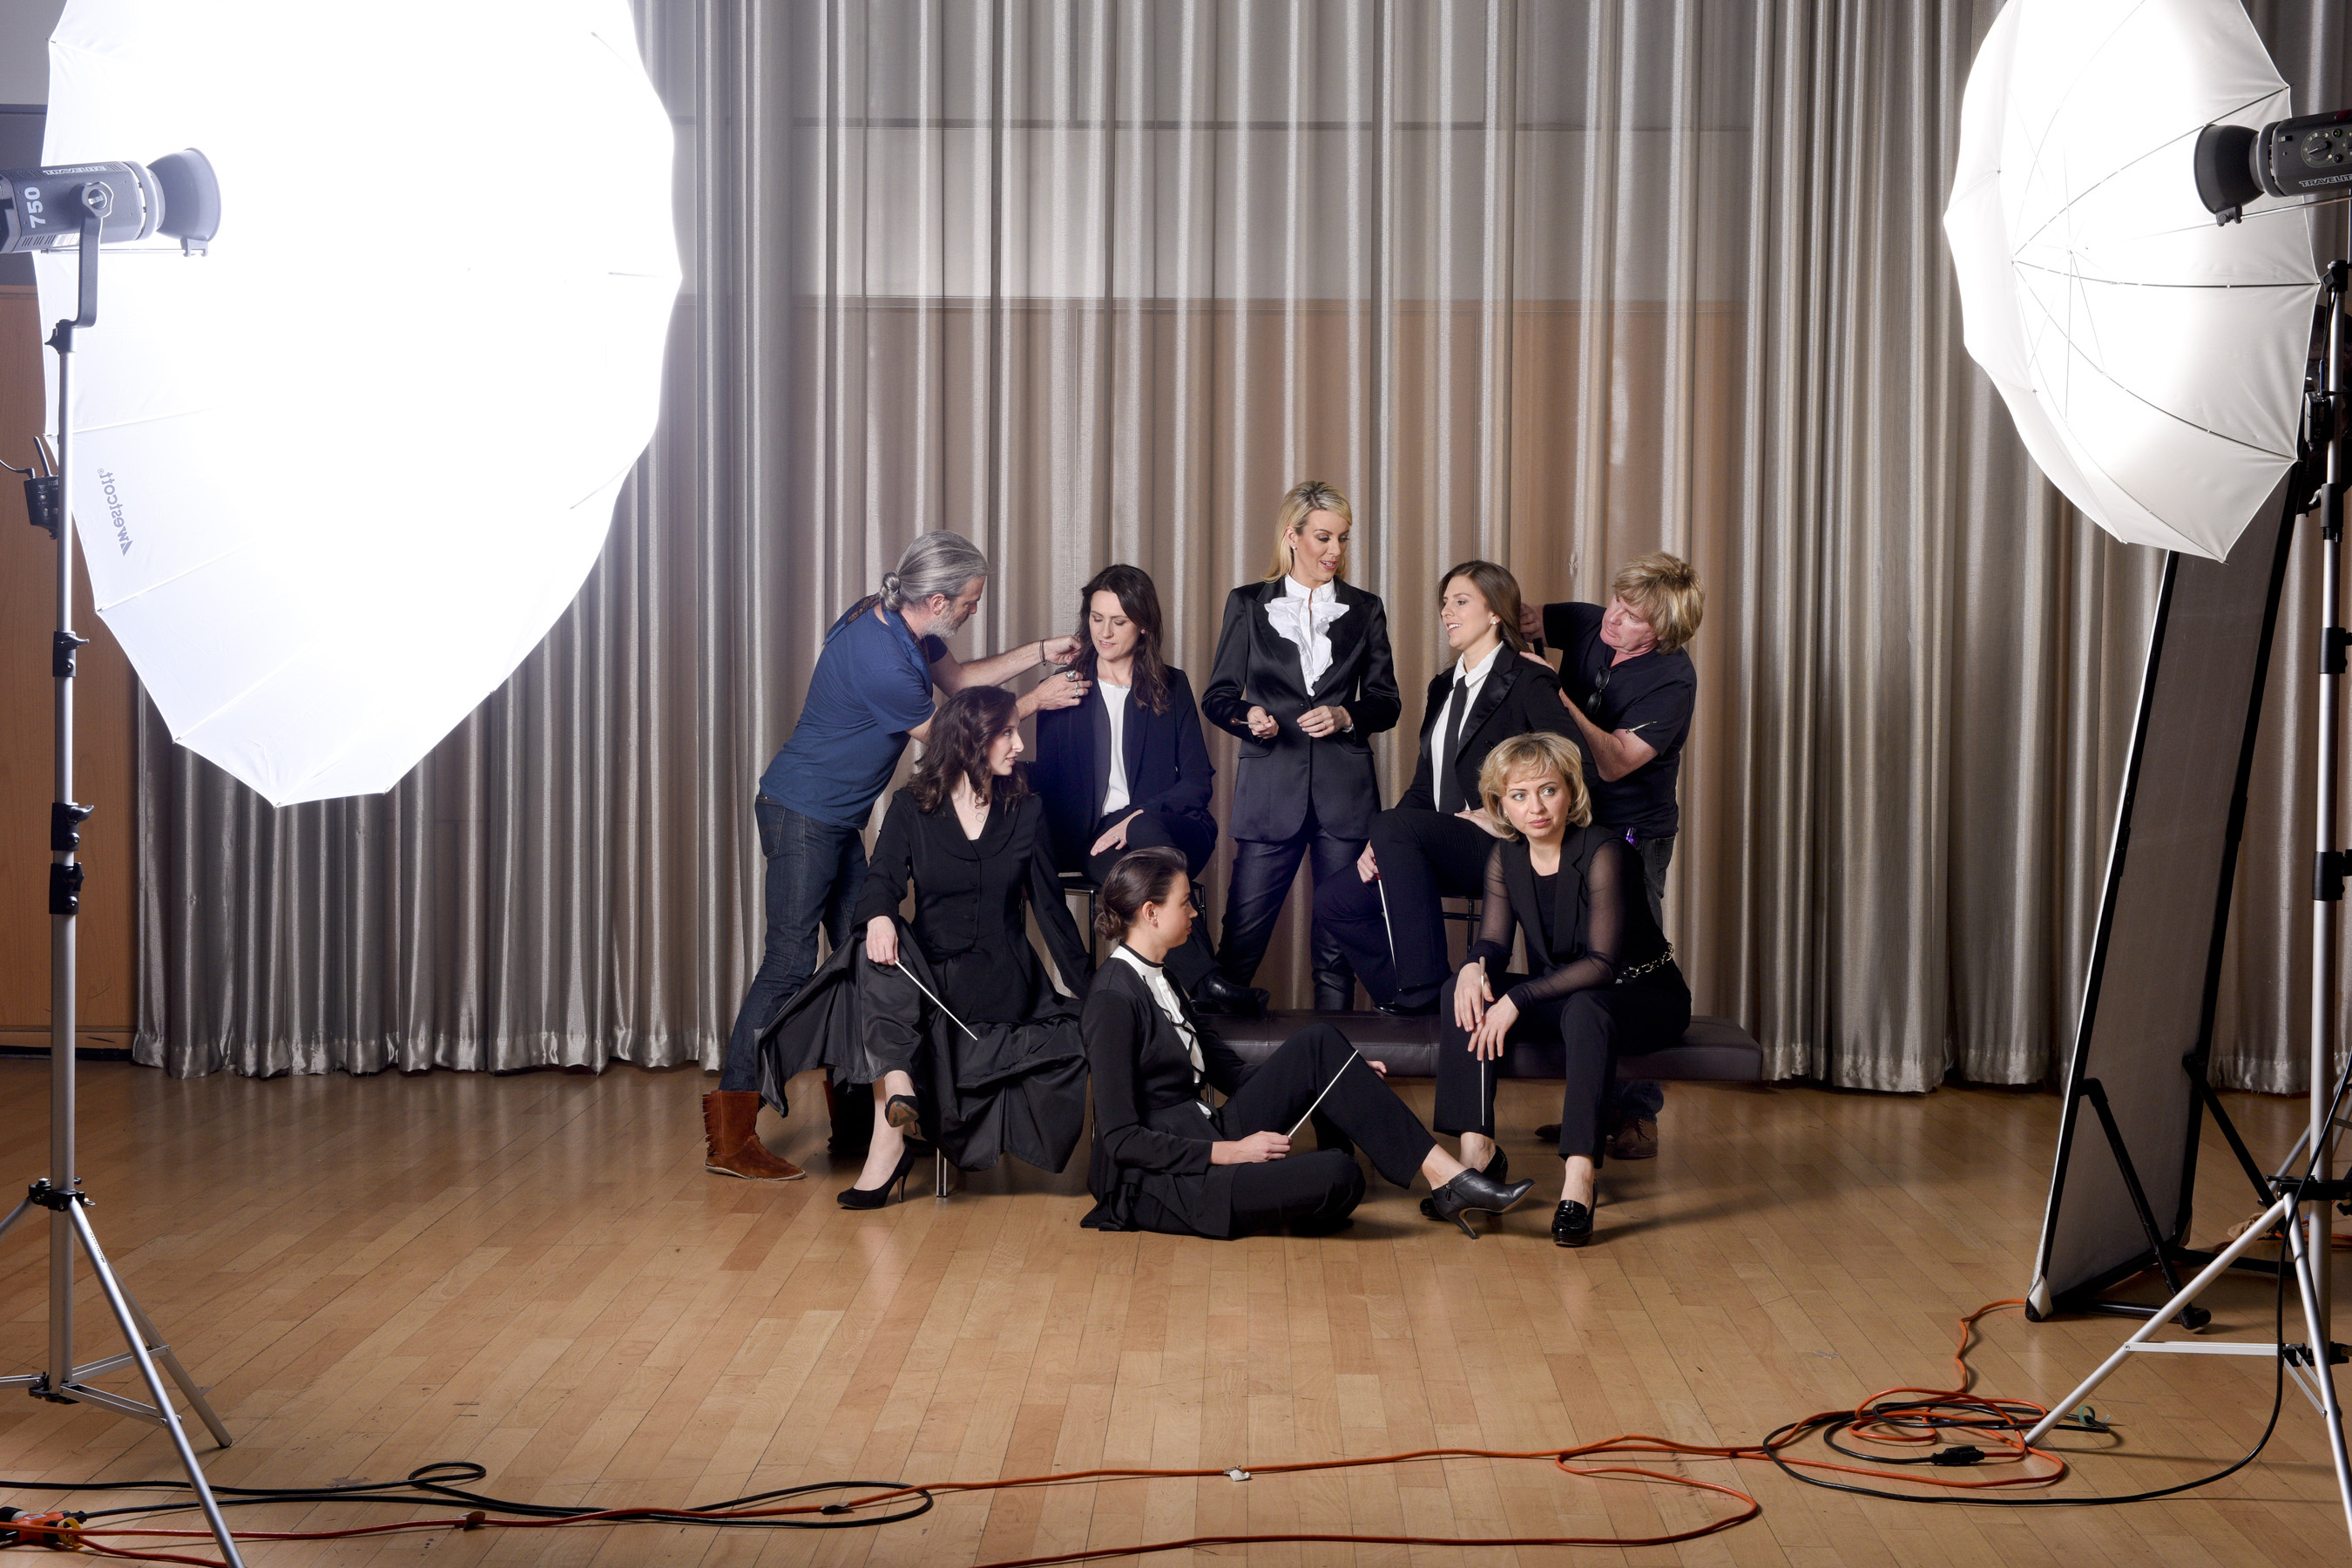 Six of the female conductors participating in the Hart Institute posing in tuxedos with batons for a photo shoot as two others help them adjust their positions for the camera.